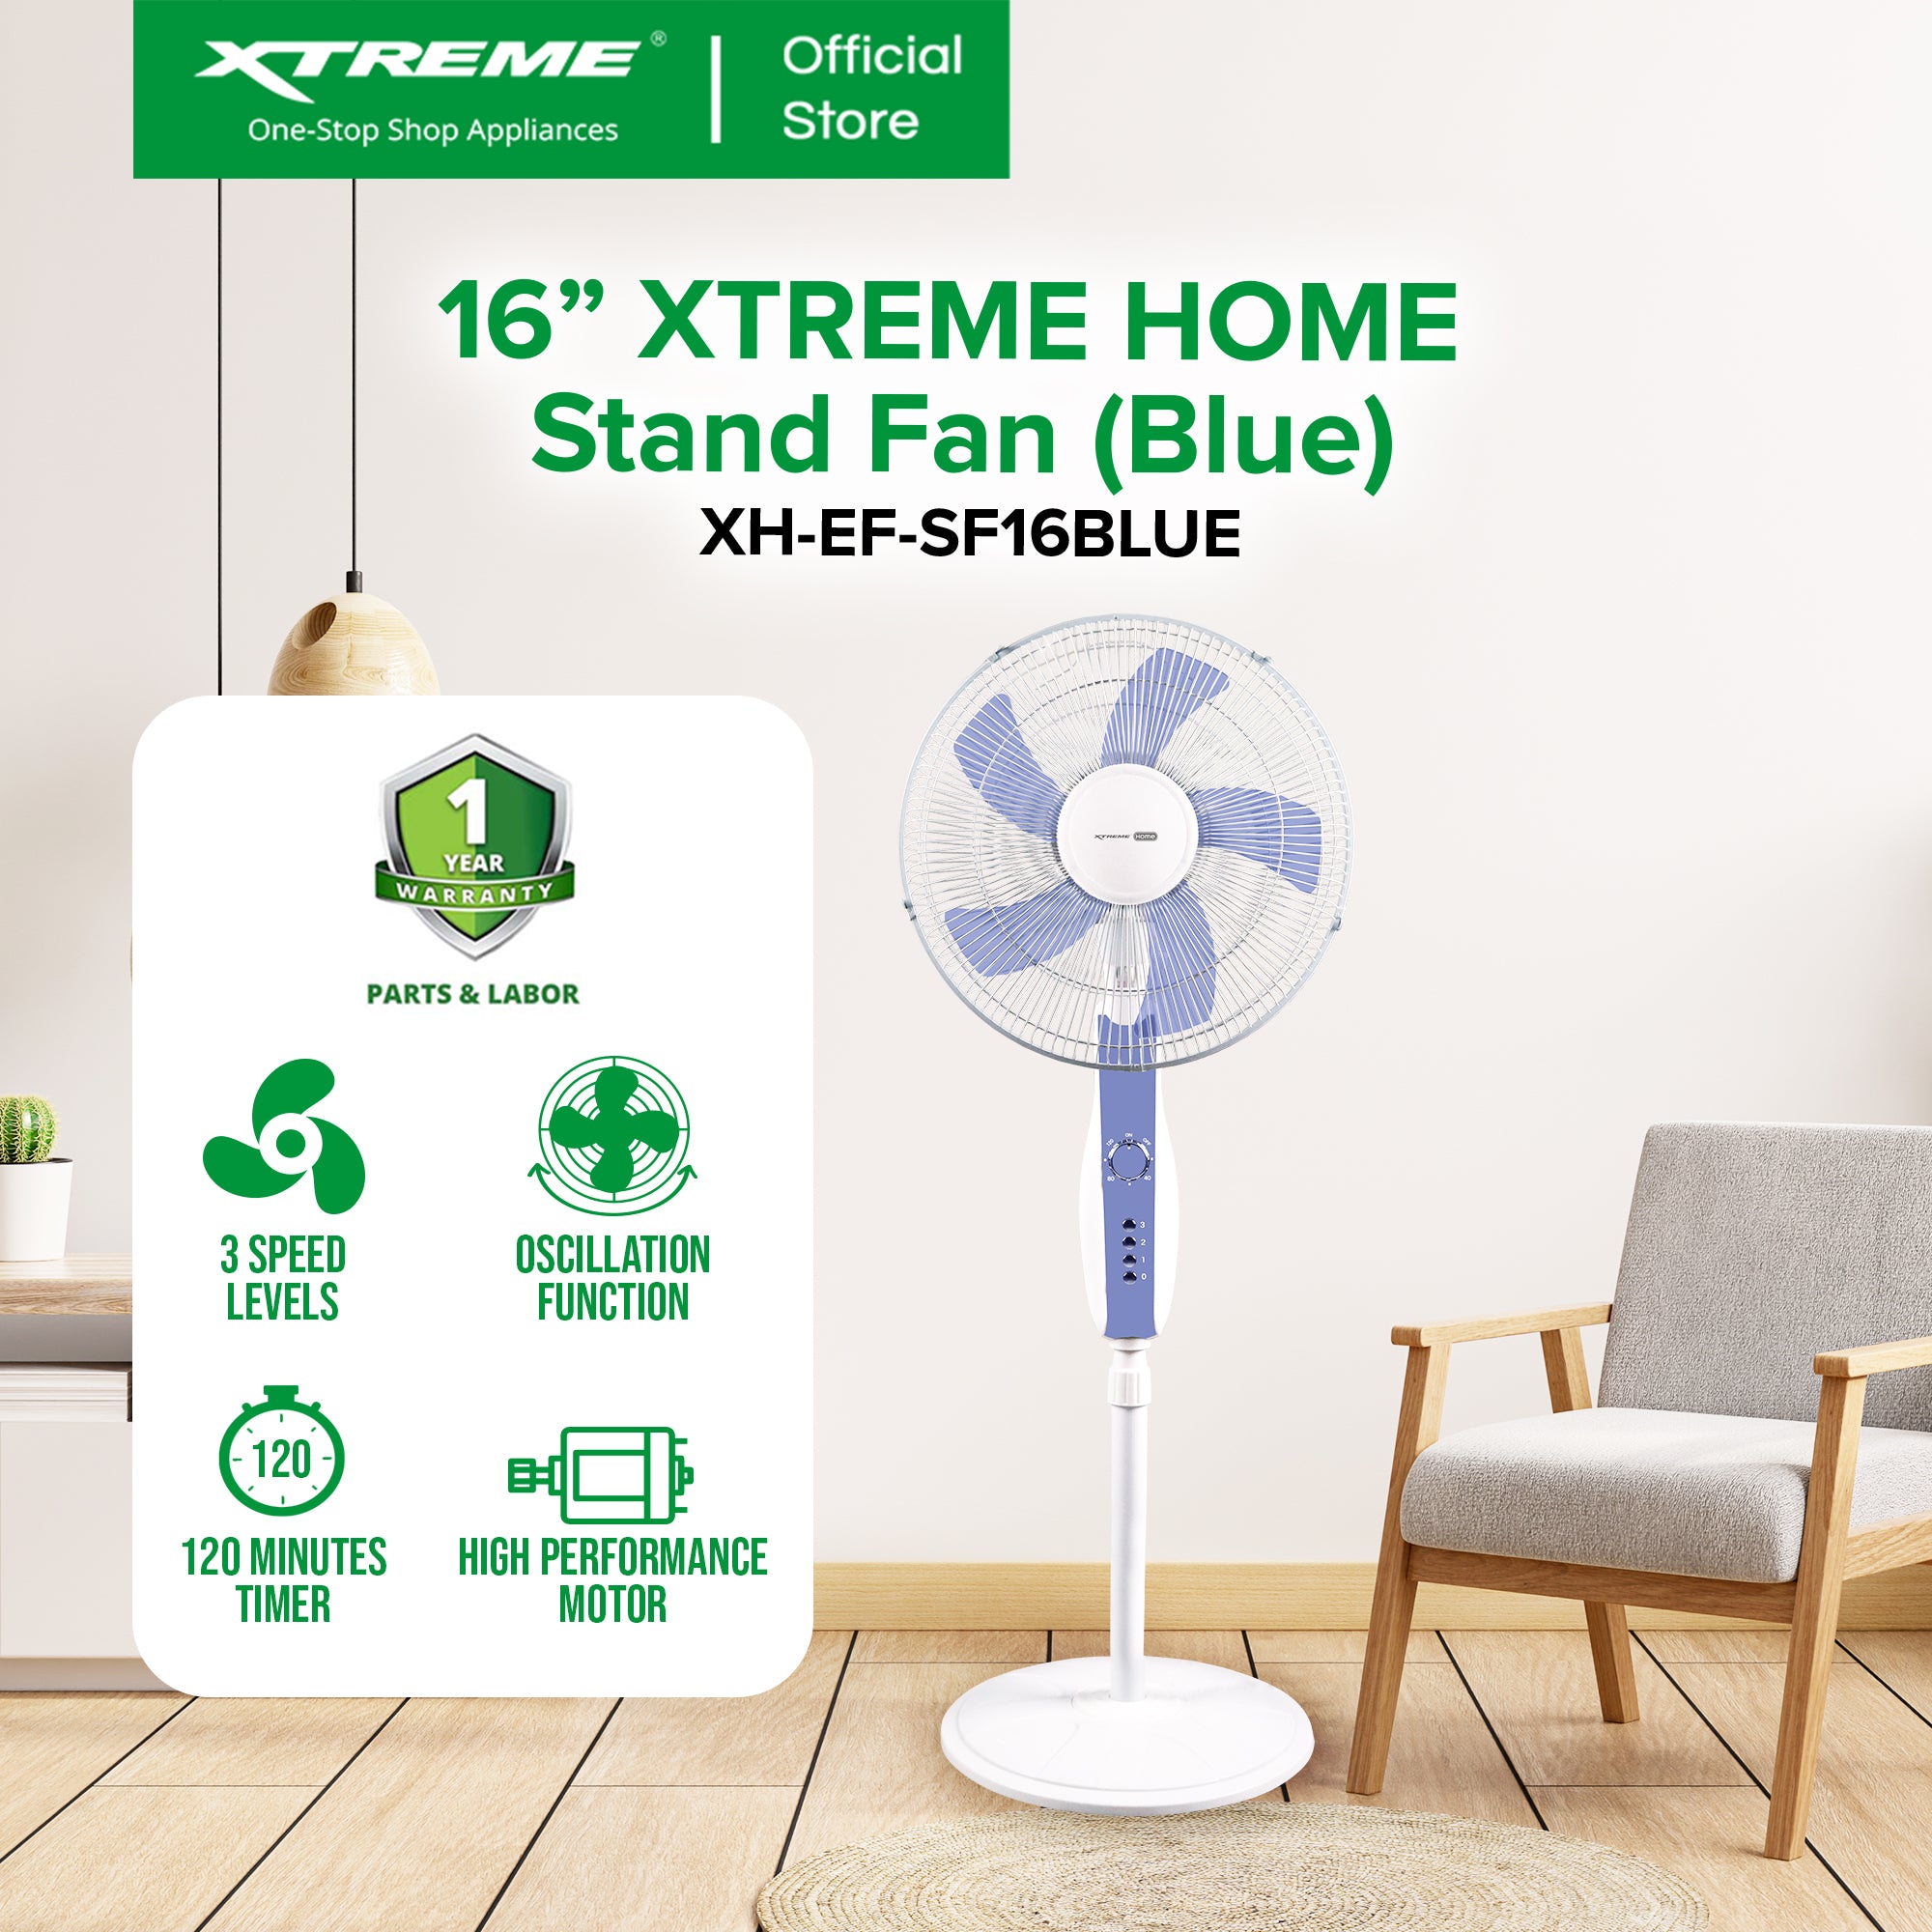 16" XTREME HOME Stand Fan (Blue) | XH-EF-SF16BLUE